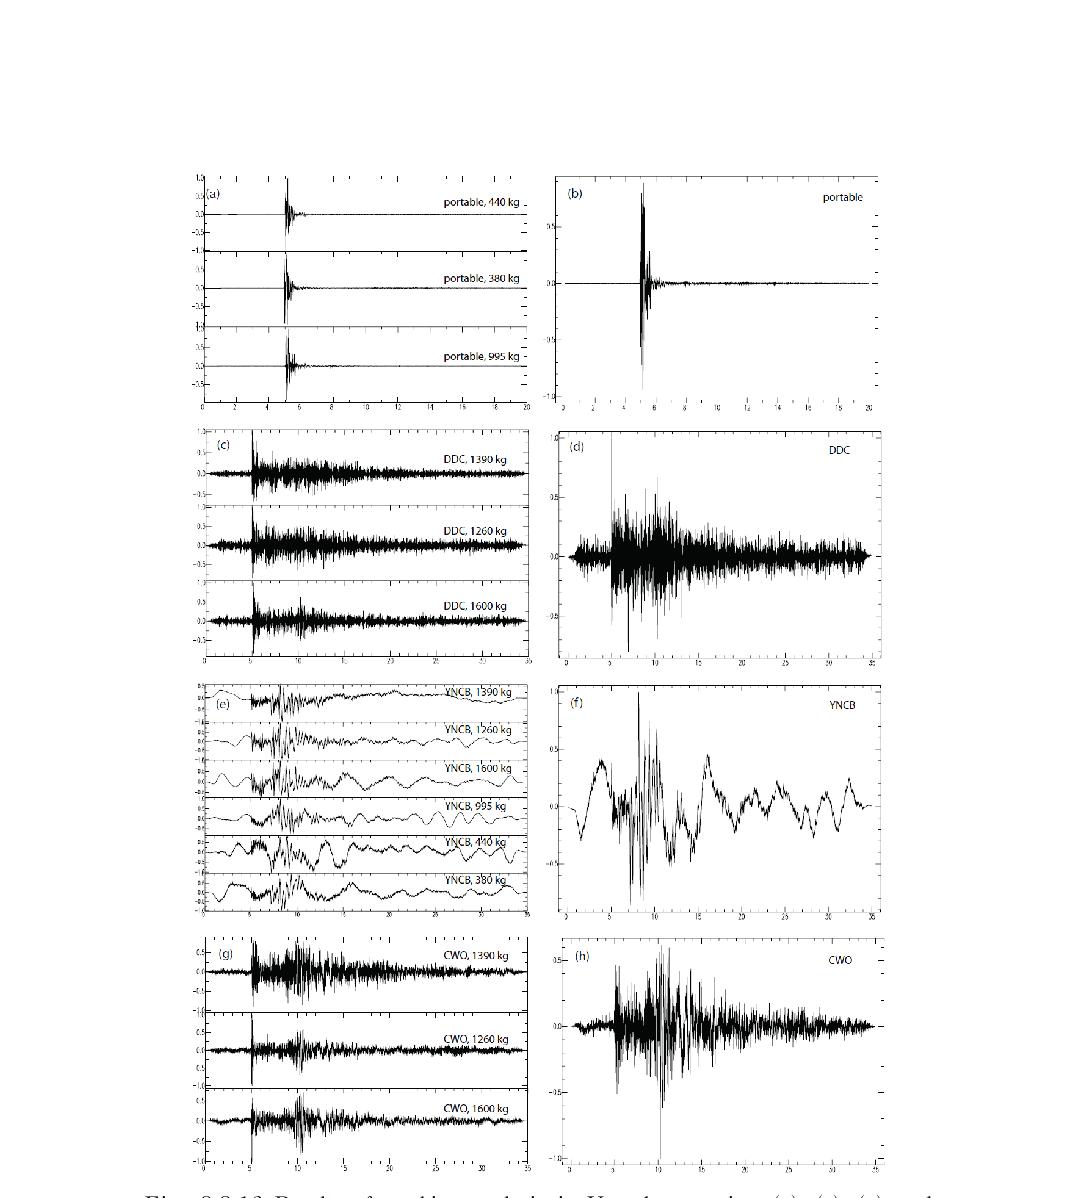 Results of stacking analysis in Yeoncheon region. (a), (c), (e), and (g) are normalized waveforms, (b), (d), (f), and (h) are stacked results for each station.